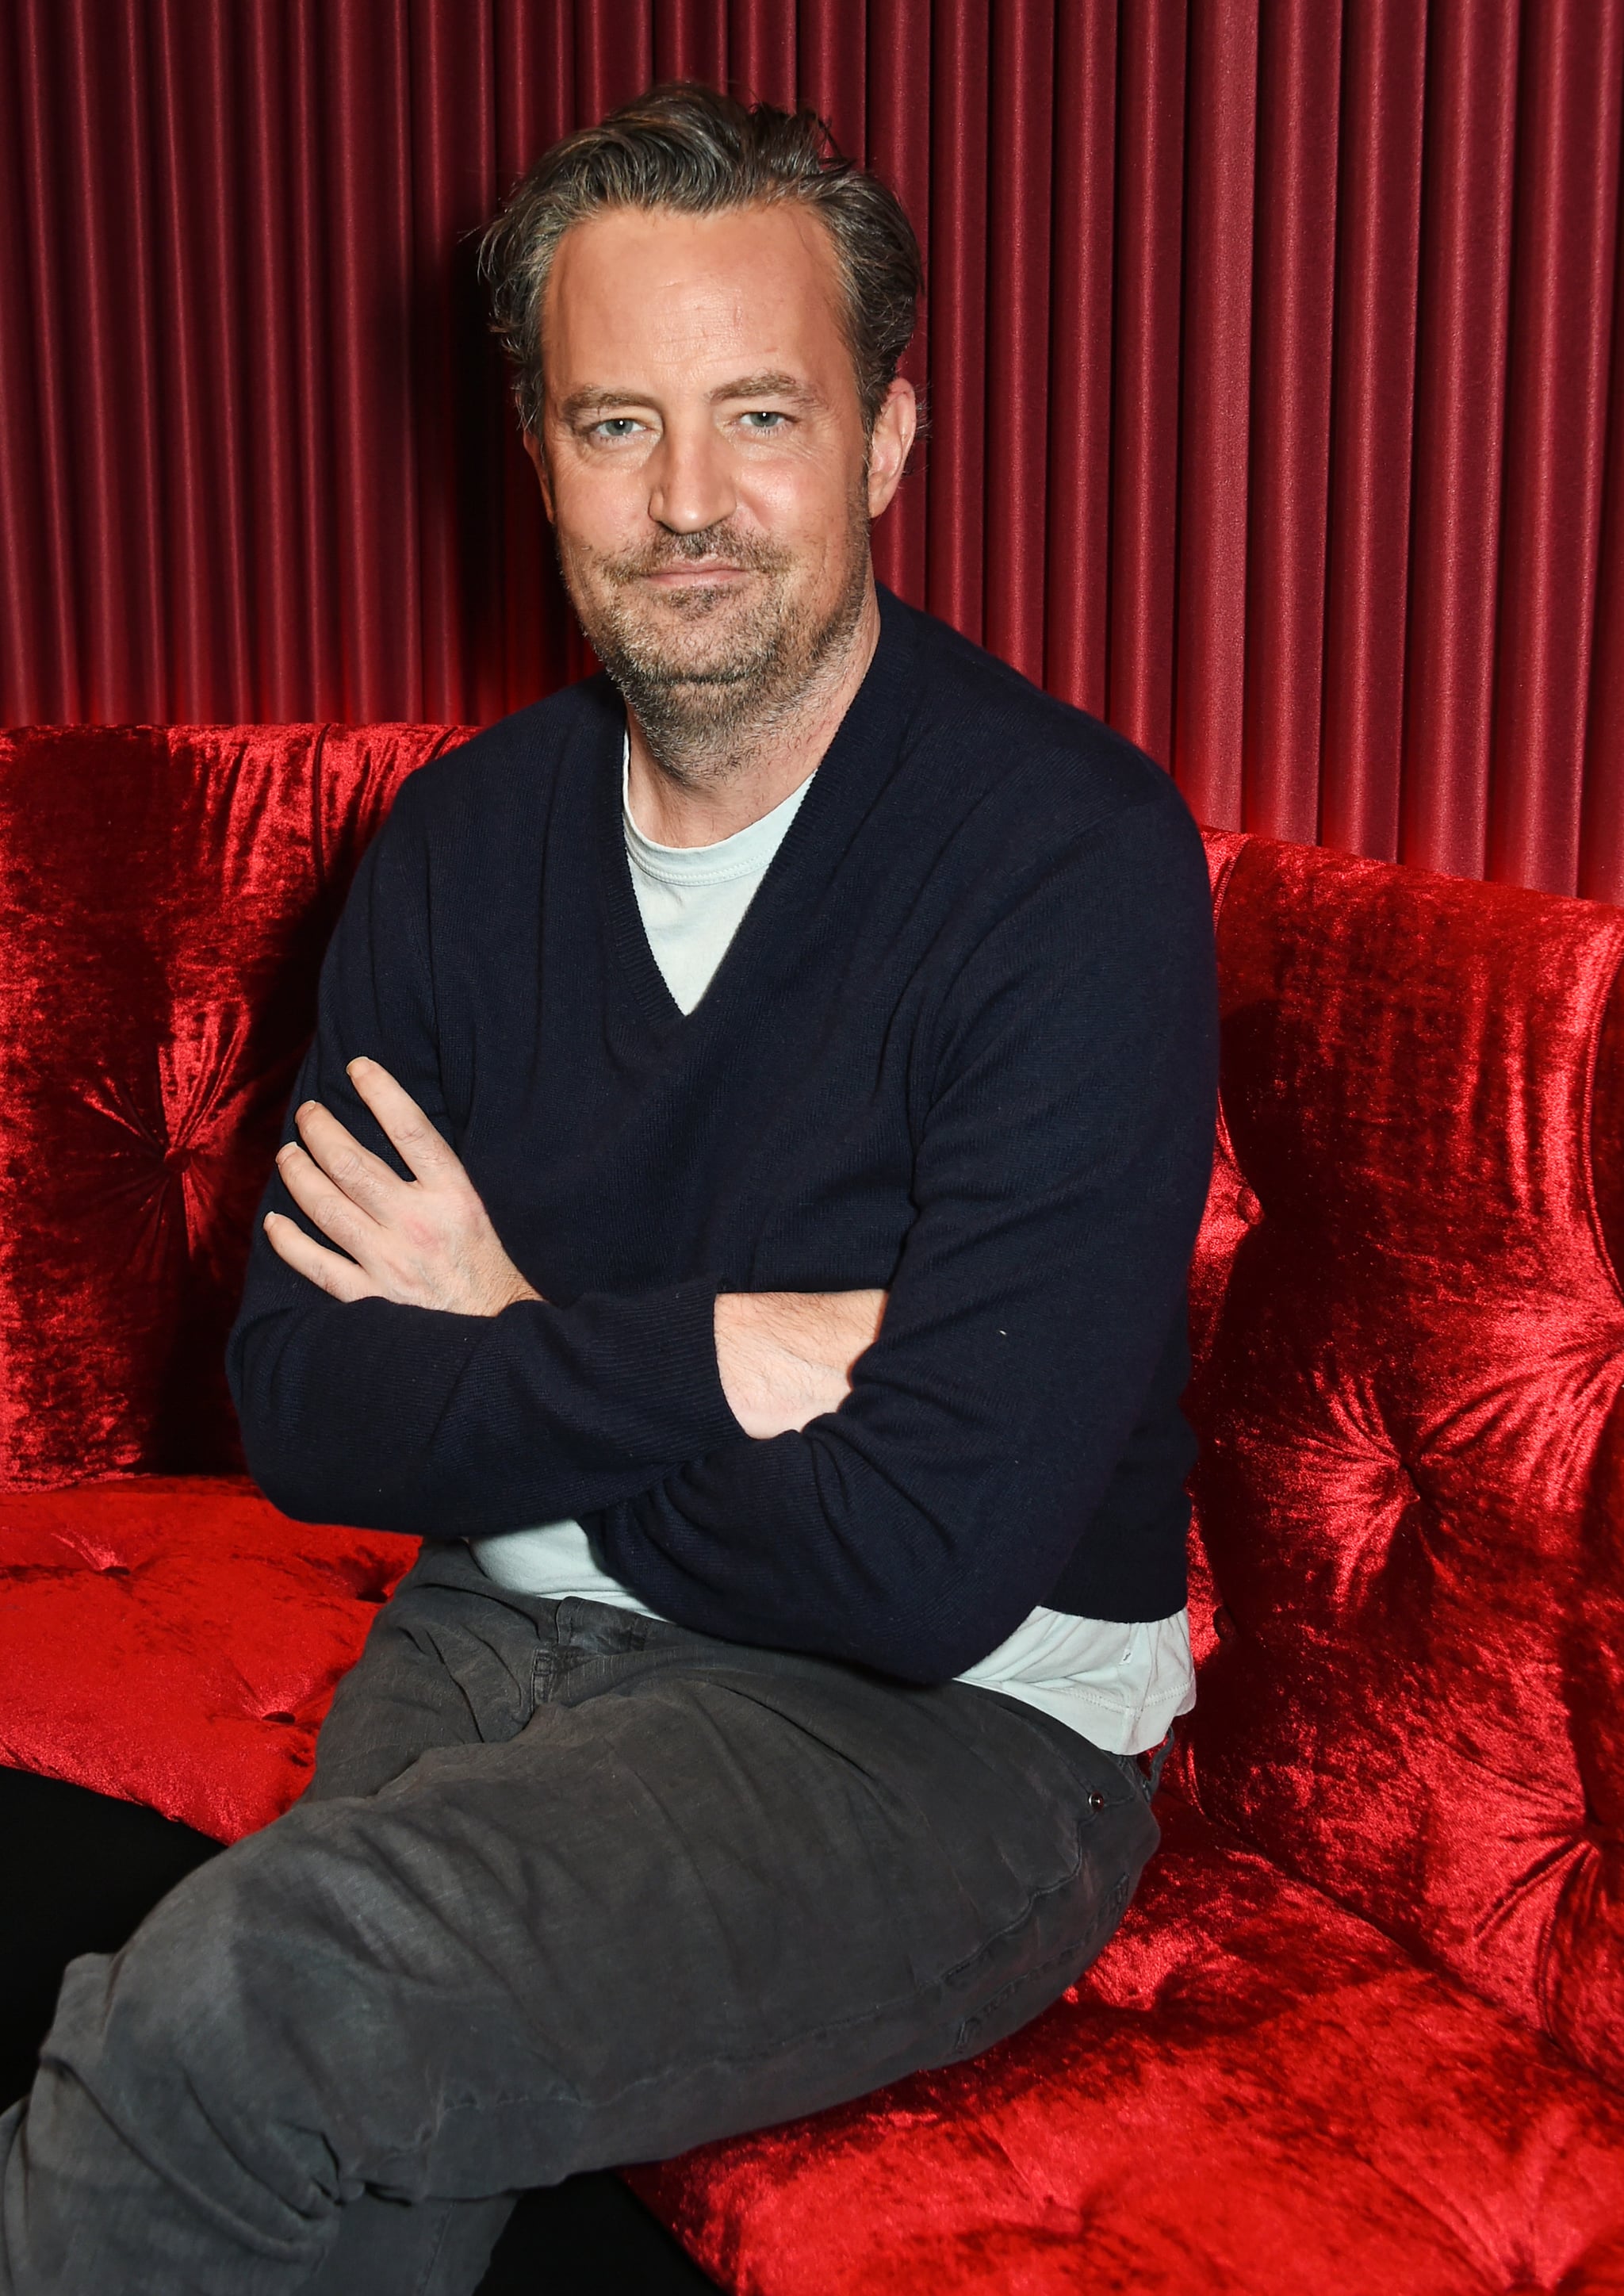 LONDON, ENGLAND - FEBRUARY 8: Matthew Perry poses at a photocall for 